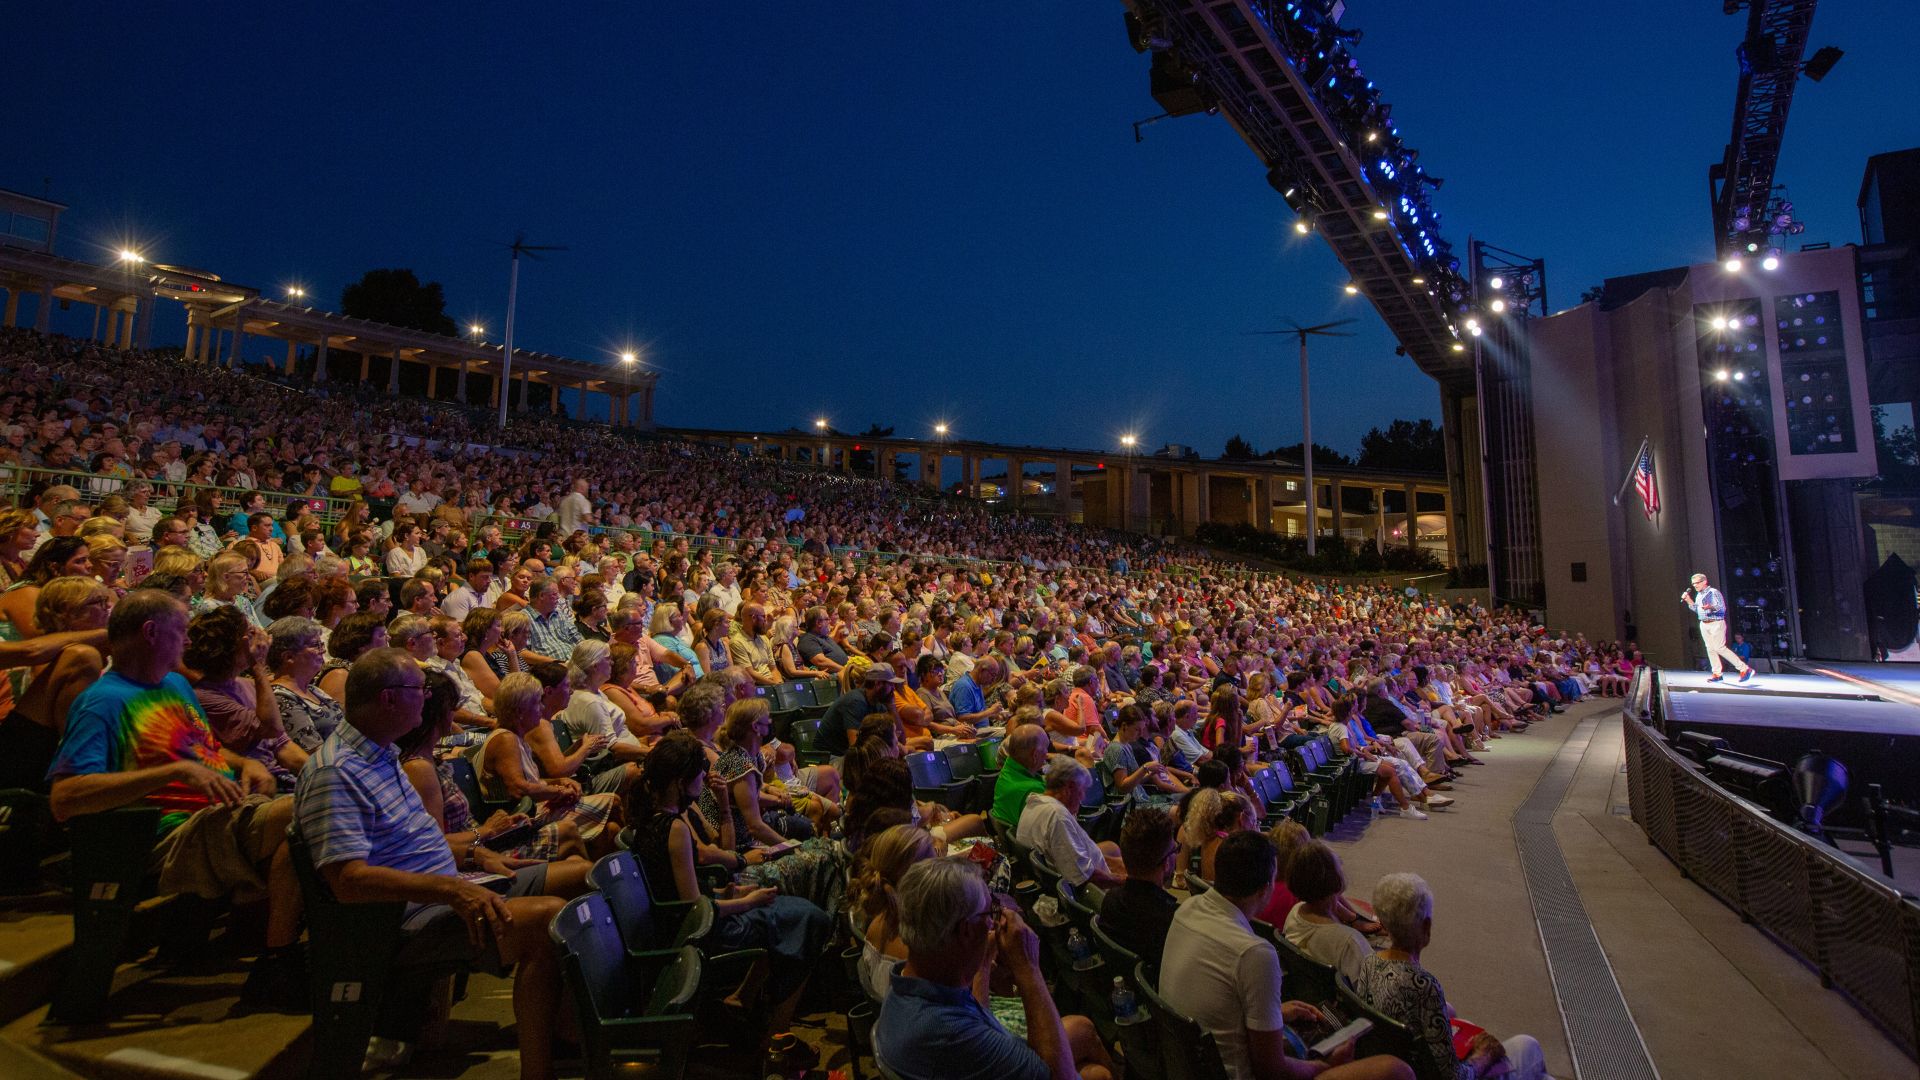 The crowd awaits the start of a Broadway show at The Muny in Forest Park.